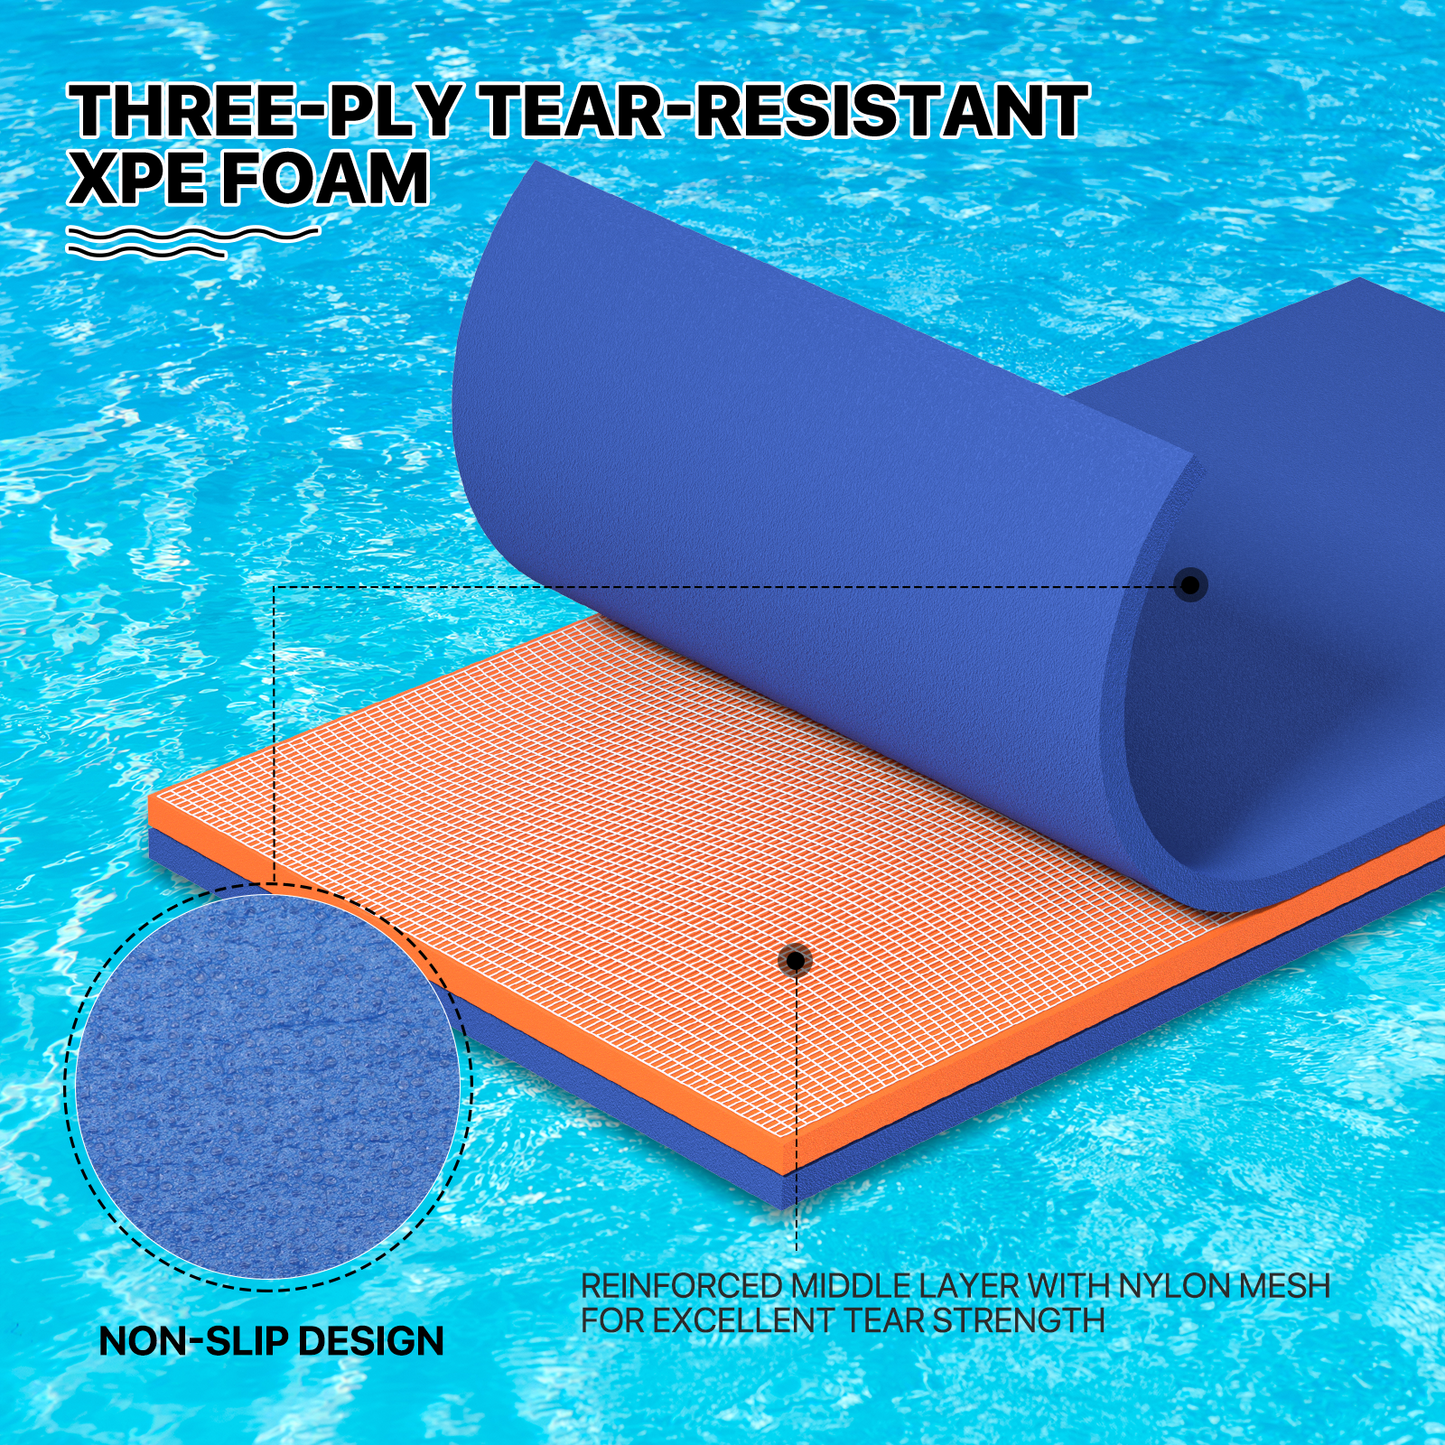 6 * 3 ft Water Floating Mat